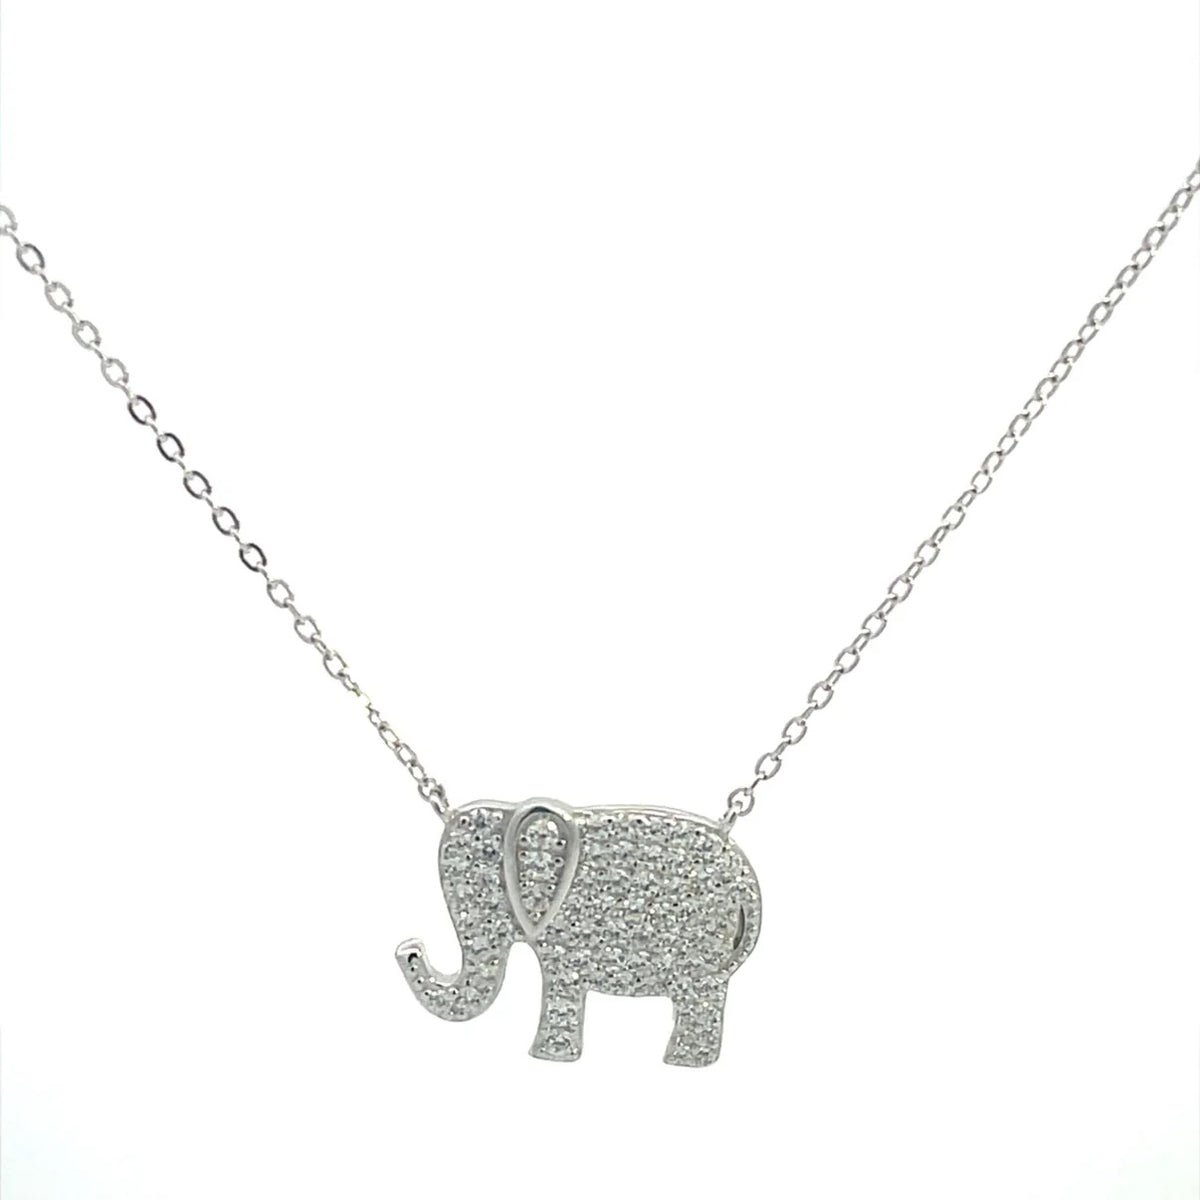 Elephant necklace, elephant necklaces, gold plated necklaces, nice necklaces, gift ideas, nice jewelry, tarnish free jewelry, cute elephant necklaces, nice elephant necklaces, nice jewelry, kesley fashion, trending fashion, birthday gifts, graduation gift ideas, graduation jewelry gift ideas, nice jewelry, jewelry websites, kesley jewelry, kesley fahsion, diamond elephant necklaces, gold plated necklaces, real sterling silver necklaces 